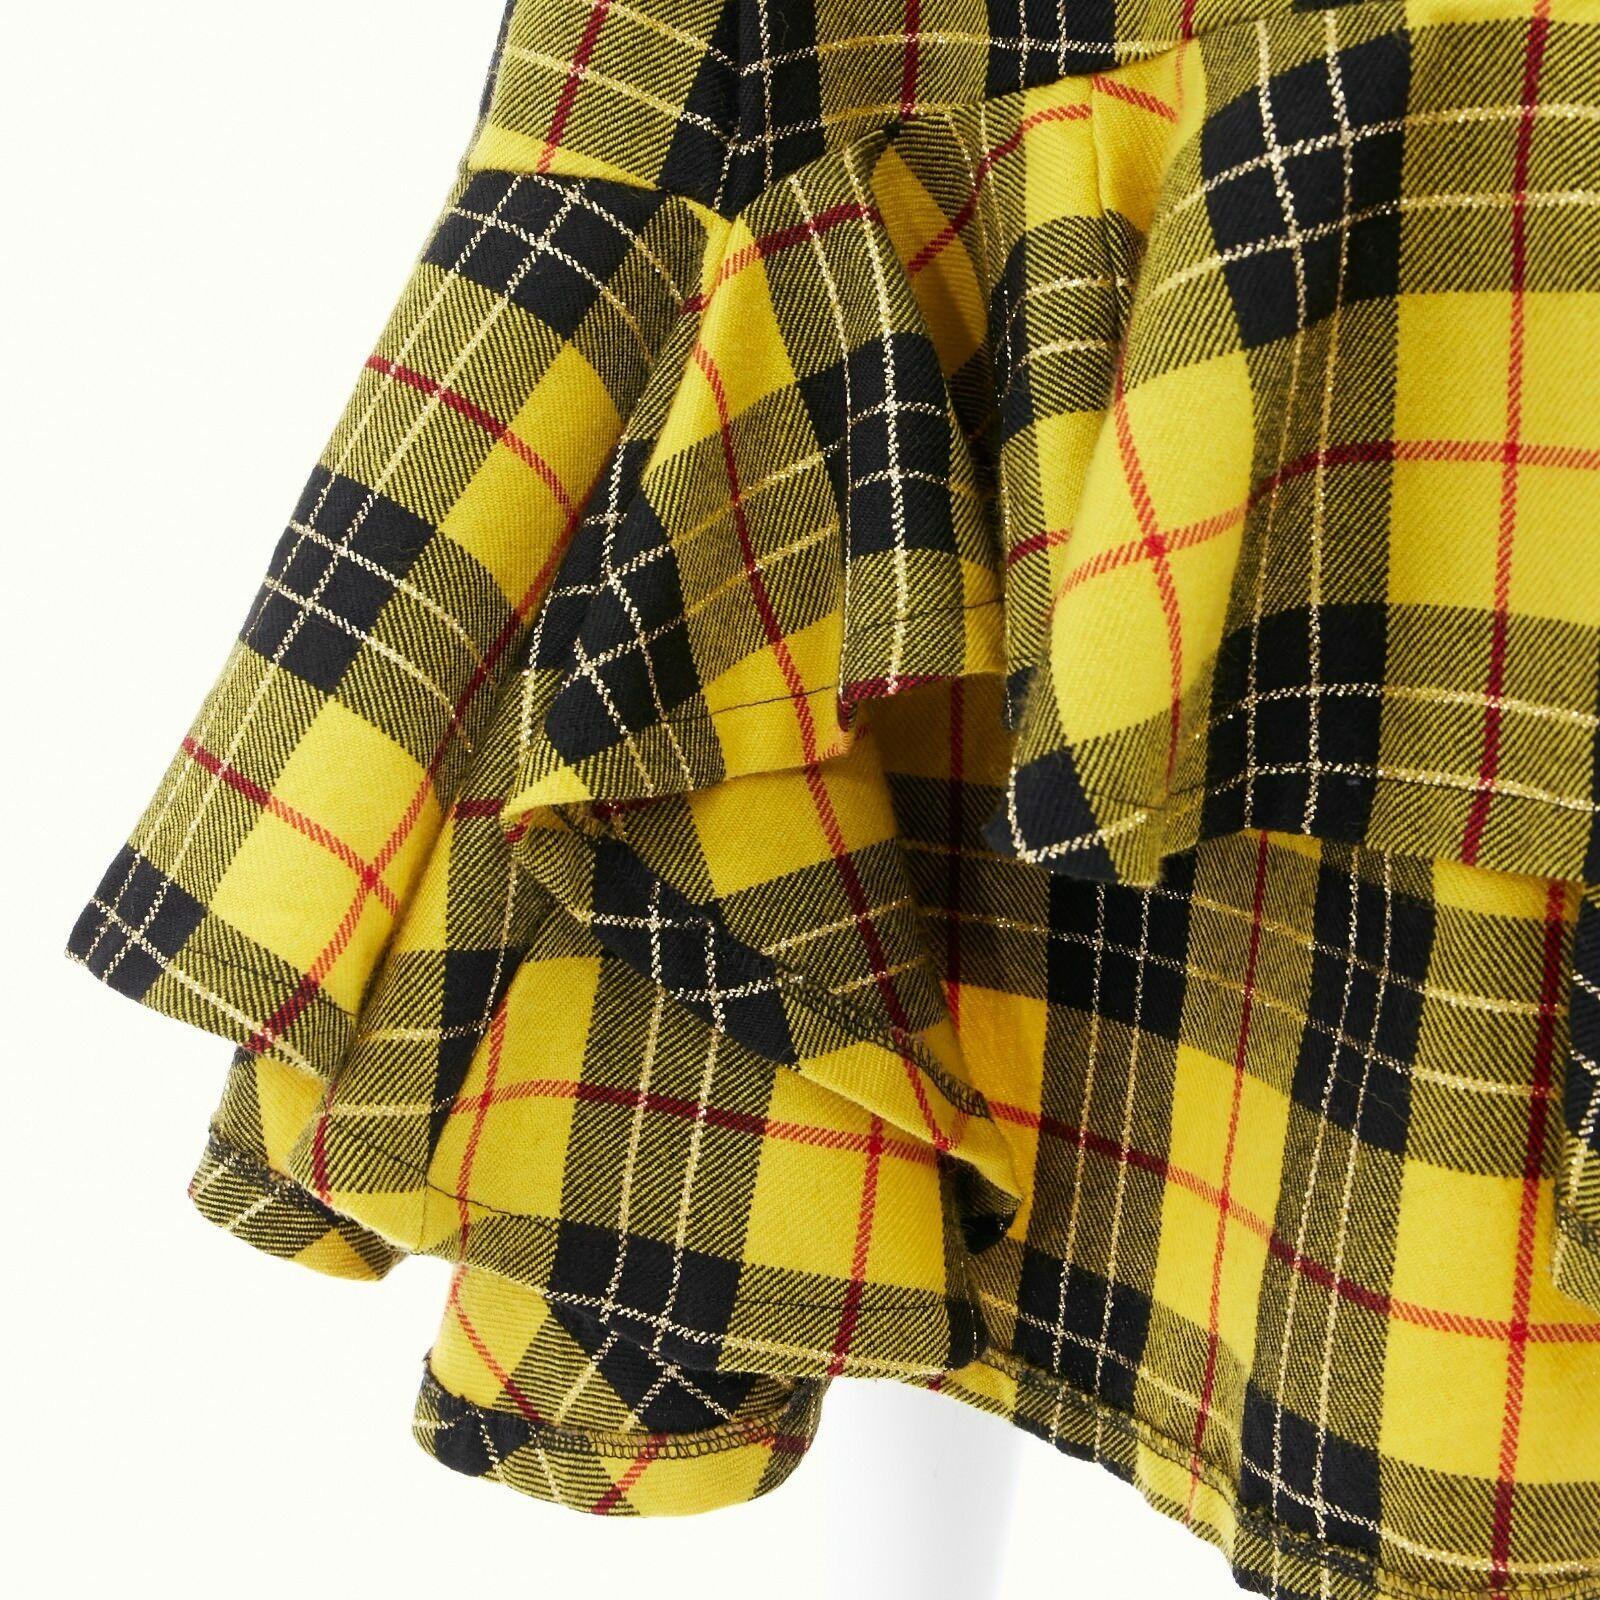 COMME DES GARCONS AW99 punk yellow tartan plaid ruffle hem layered wrap skirt M
COMME DES GARCONS
FROM THE FALL WINTER 1999 COLLECTION
100% wool. Yellow black punk-inspired plaid tartain wool. 
Dual layered. Self wrap around skirt . 
Comes with